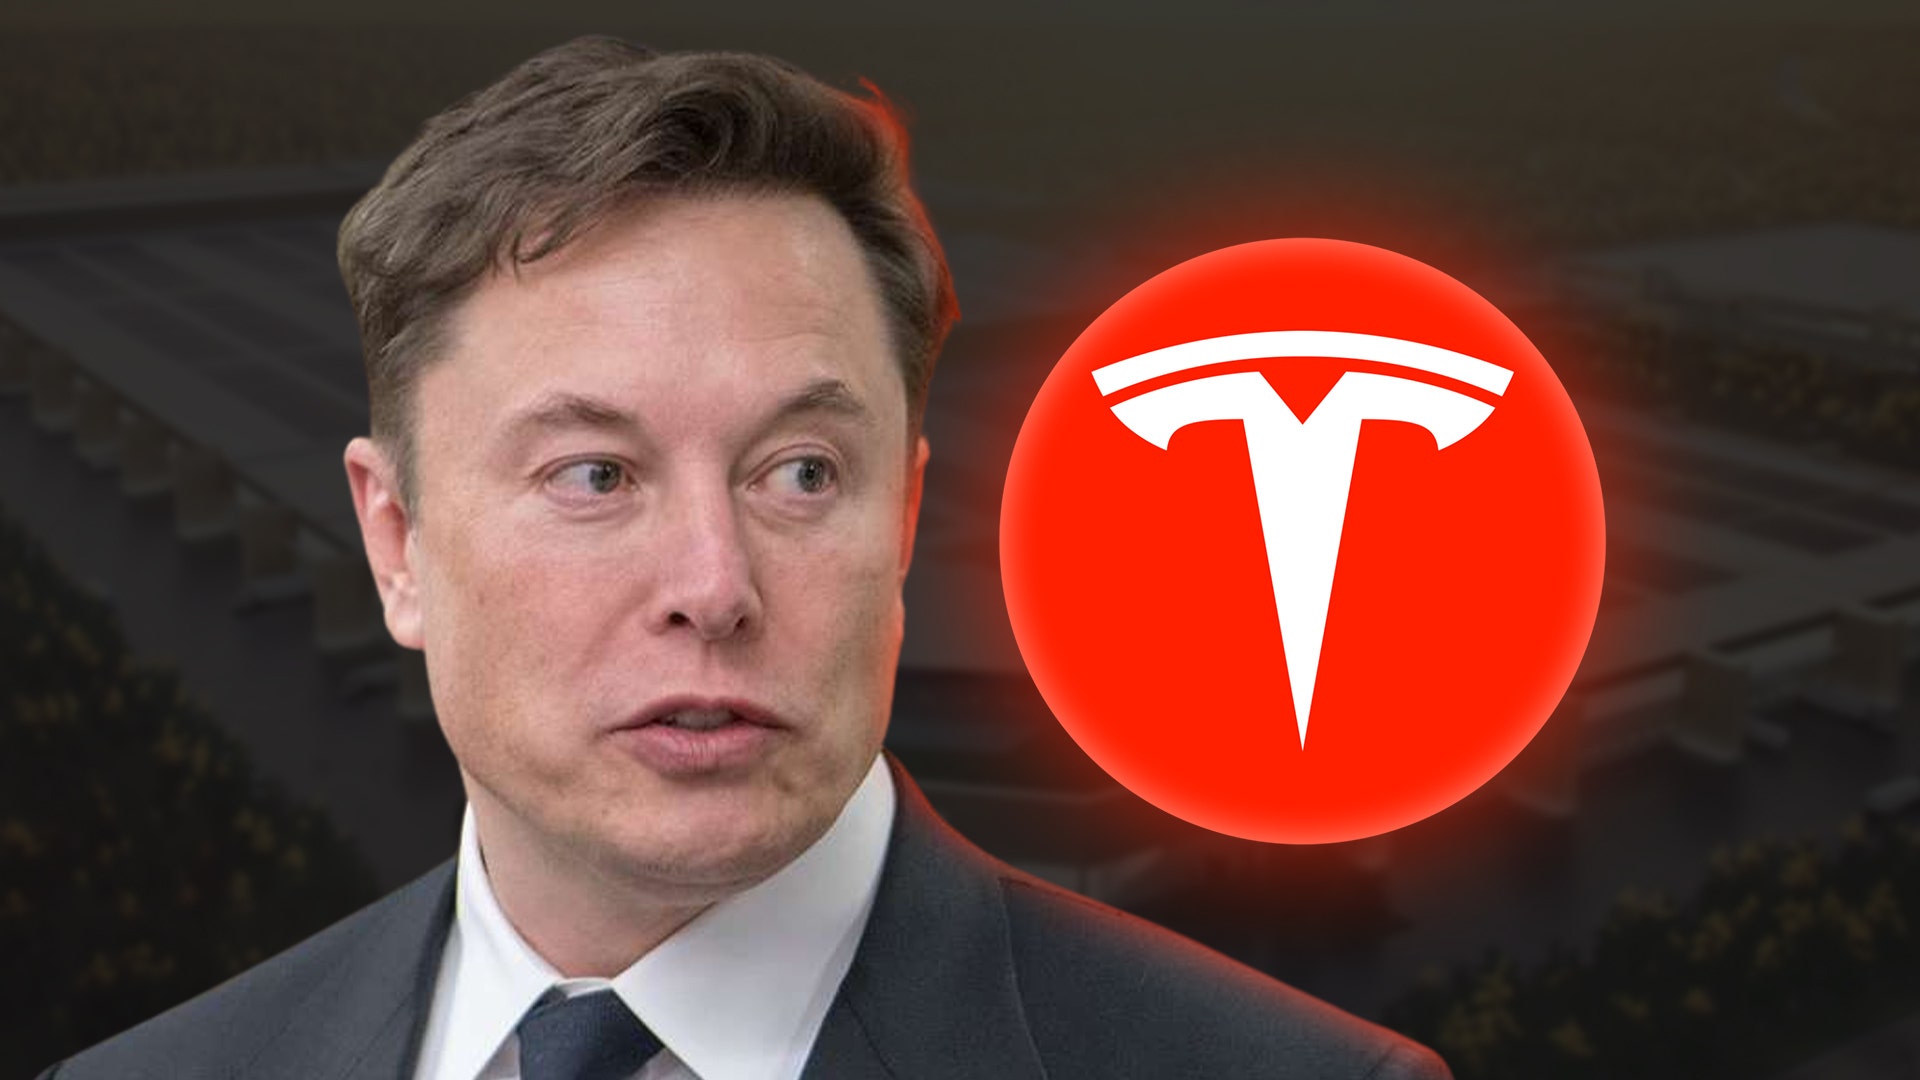 Here's How Much A $1,000 Investment In Tesla Stock Will Be Worth In 2030 If Ron Baron's Price Target Hits